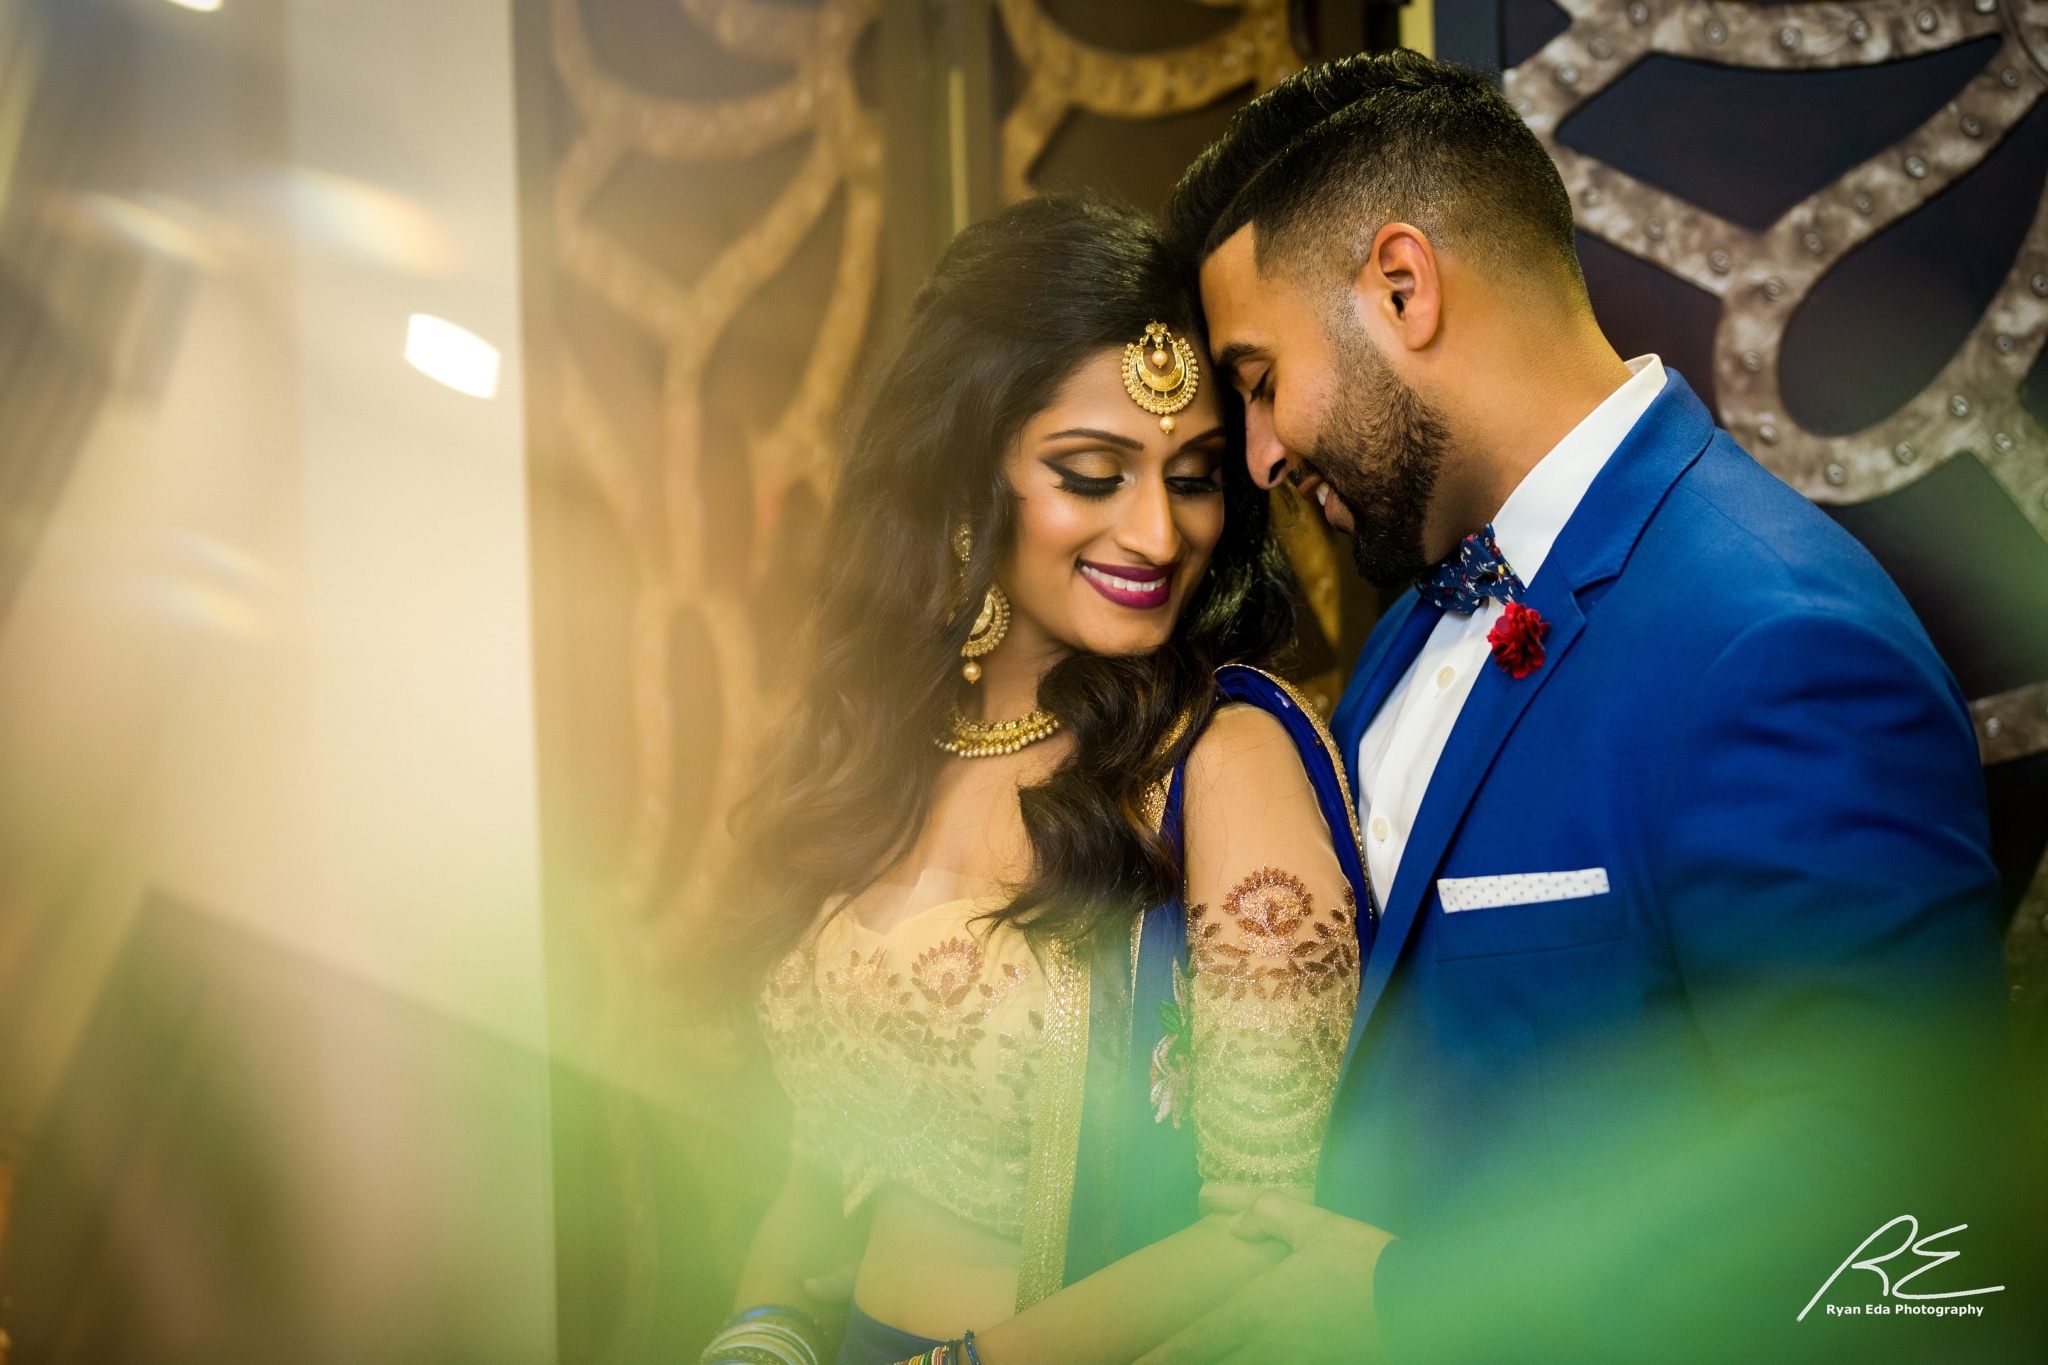 A perfect love story is what modern-day classics are made of. Wedding Photo  & Videography - @weddingsbylifeworks MUA - @makeupbypratiba... | Instagram